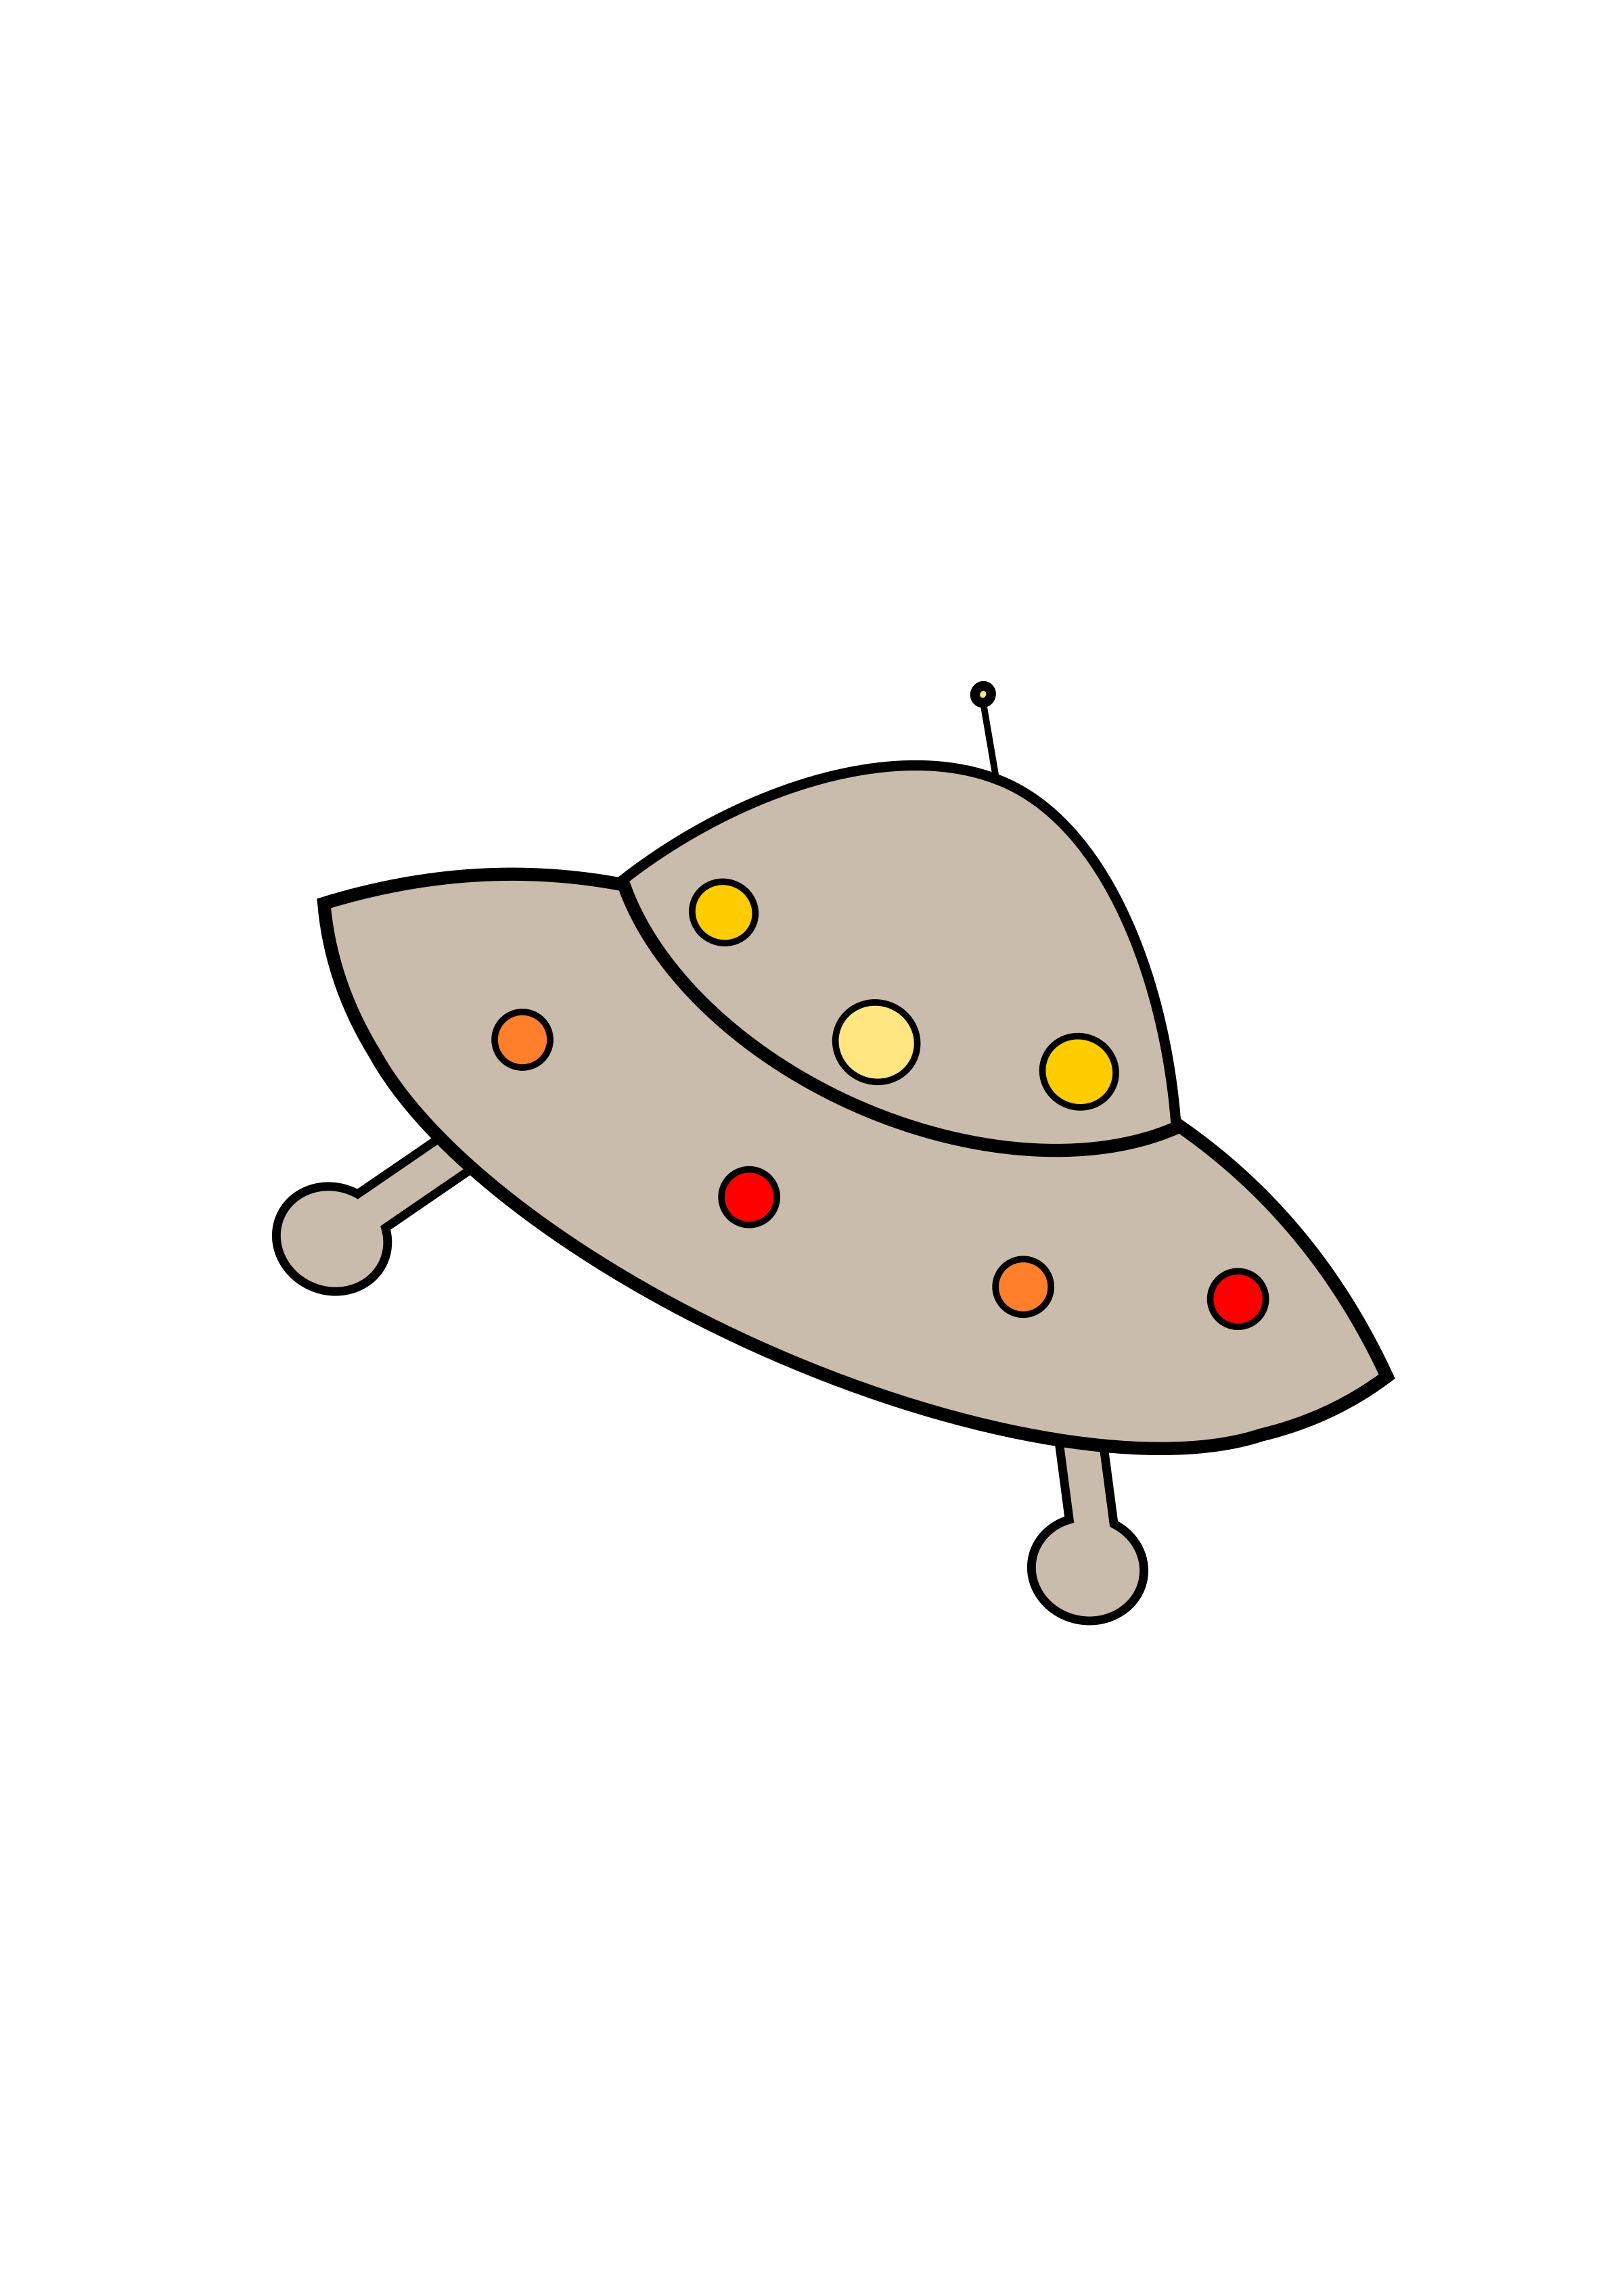 Space flying saucer icons. Ufo clipart spaceship